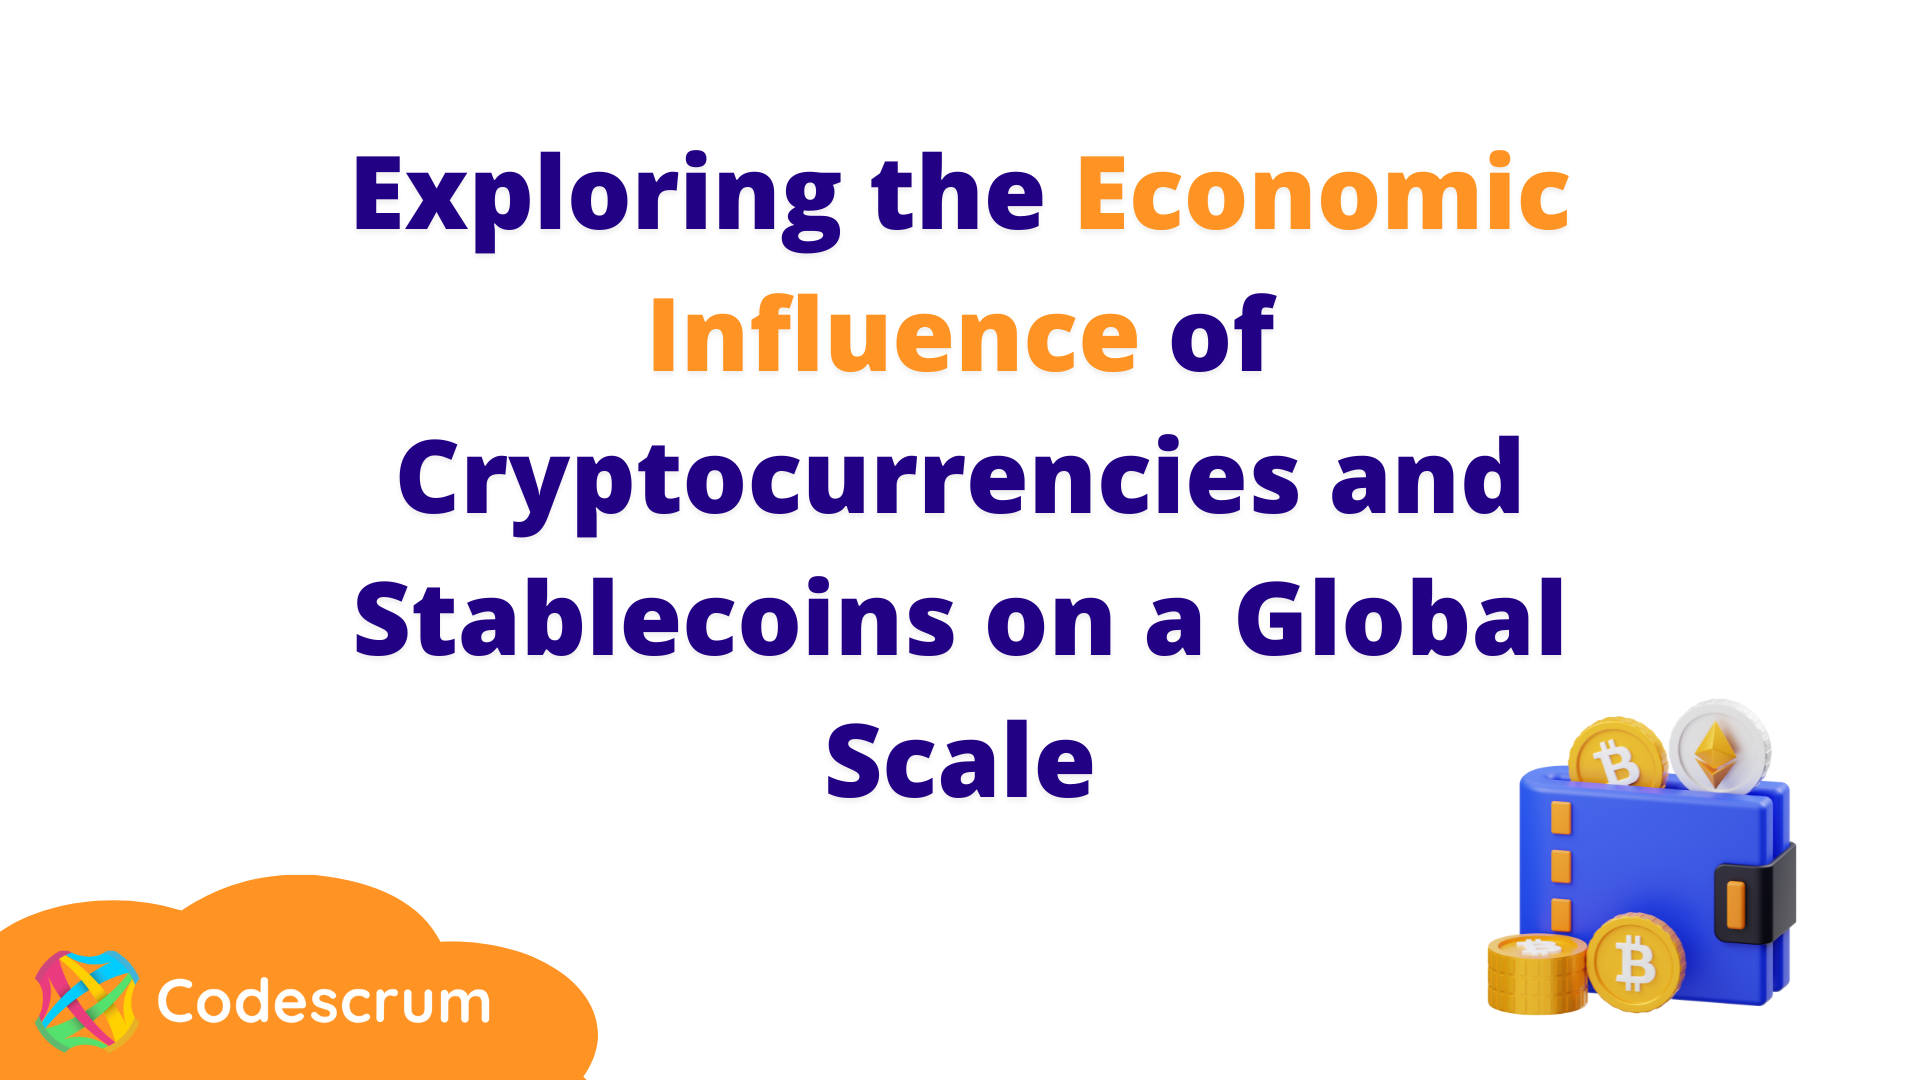 Economic Influence of Cryptocurrencies and Stablecoins Globally